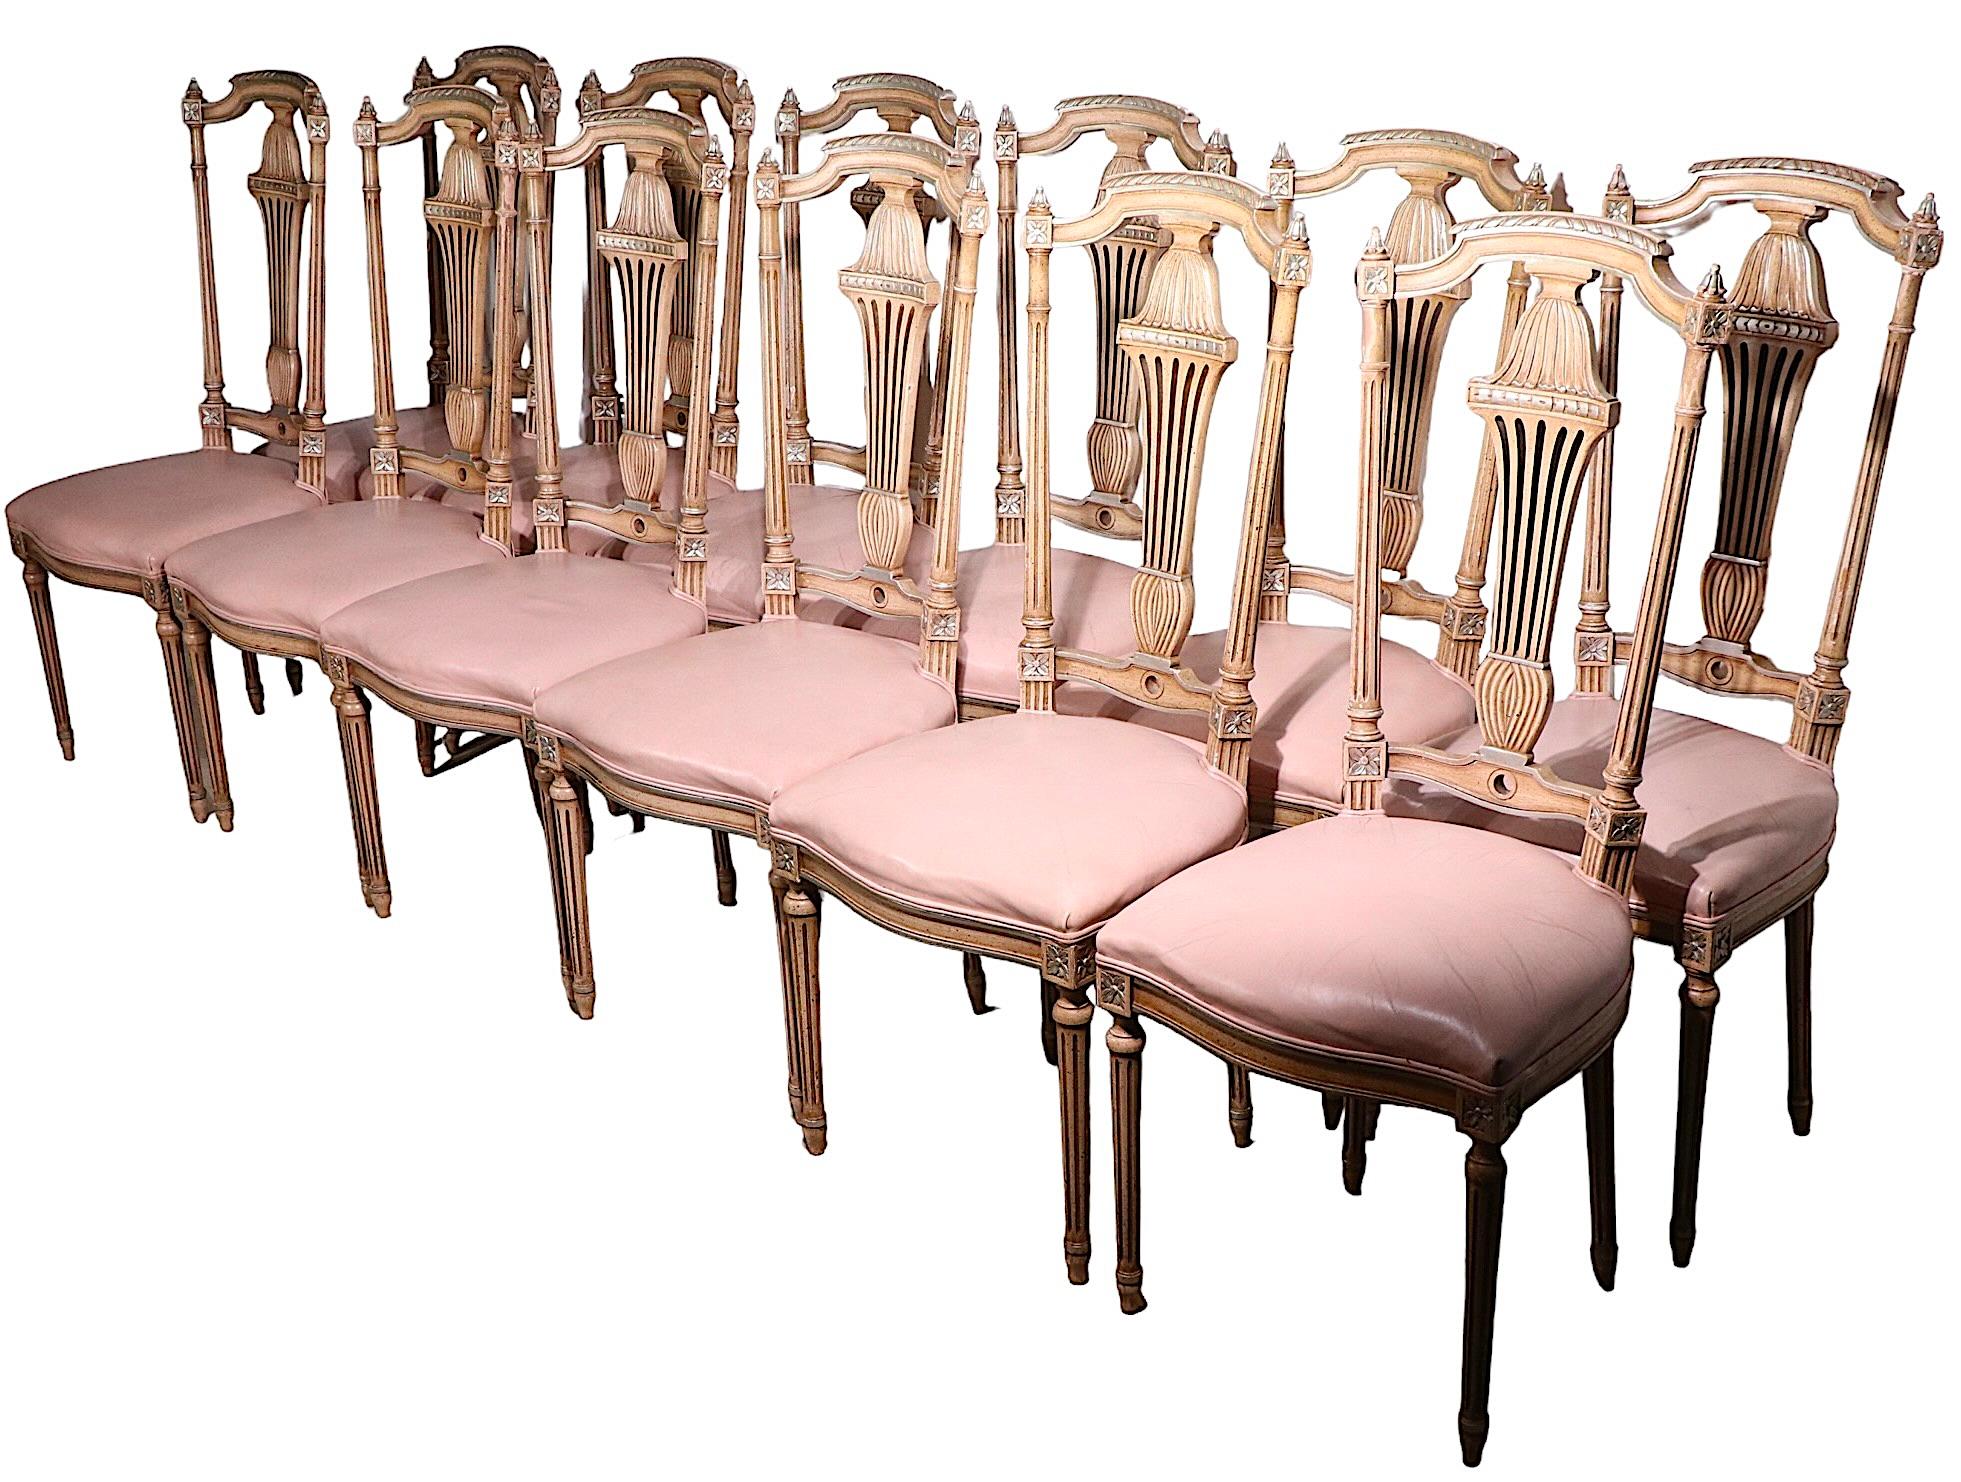 Decorative Set of 12 Italian Style Dining Chairs of Carved Wood and Leather For Sale 1